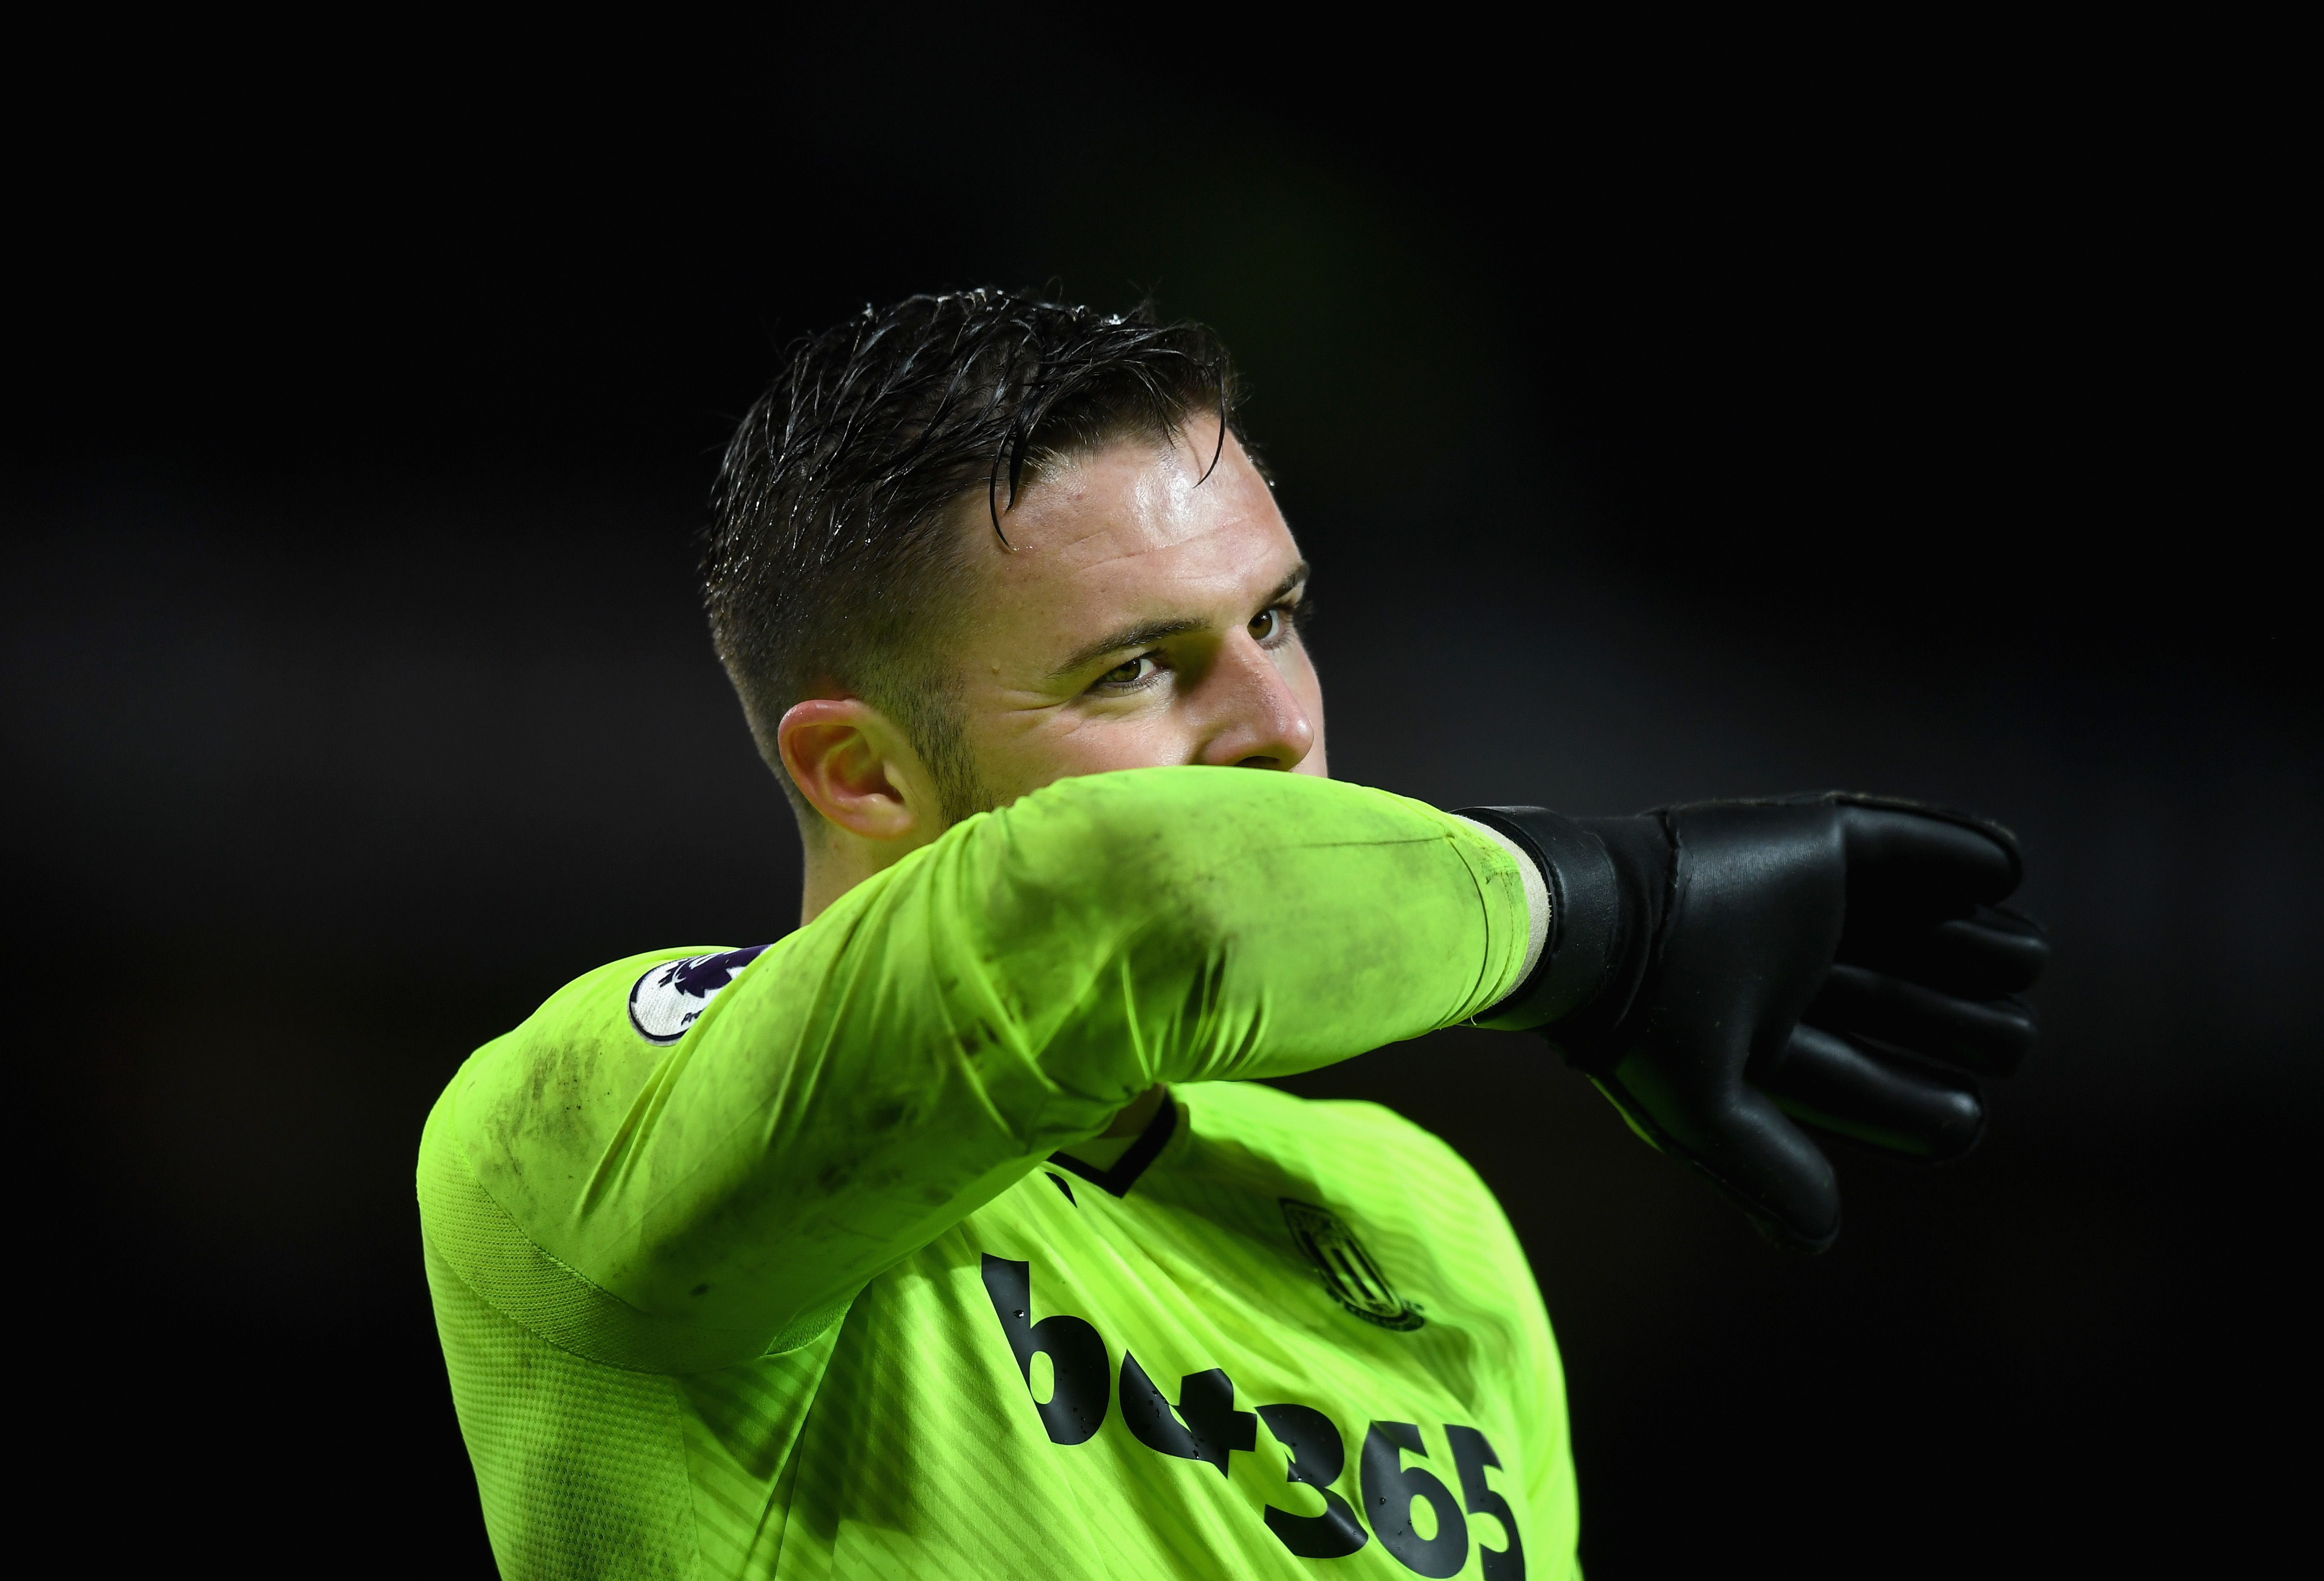 MANCHESTER, ENGLAND - JANUARY 15:  Jack Butland of Stoke City reacts during the Premier League match between Manchester United and Stoke City at Old Trafford on January 15, 2018 in Manchester, England.  (Photo by Michael Regan/Getty Images)